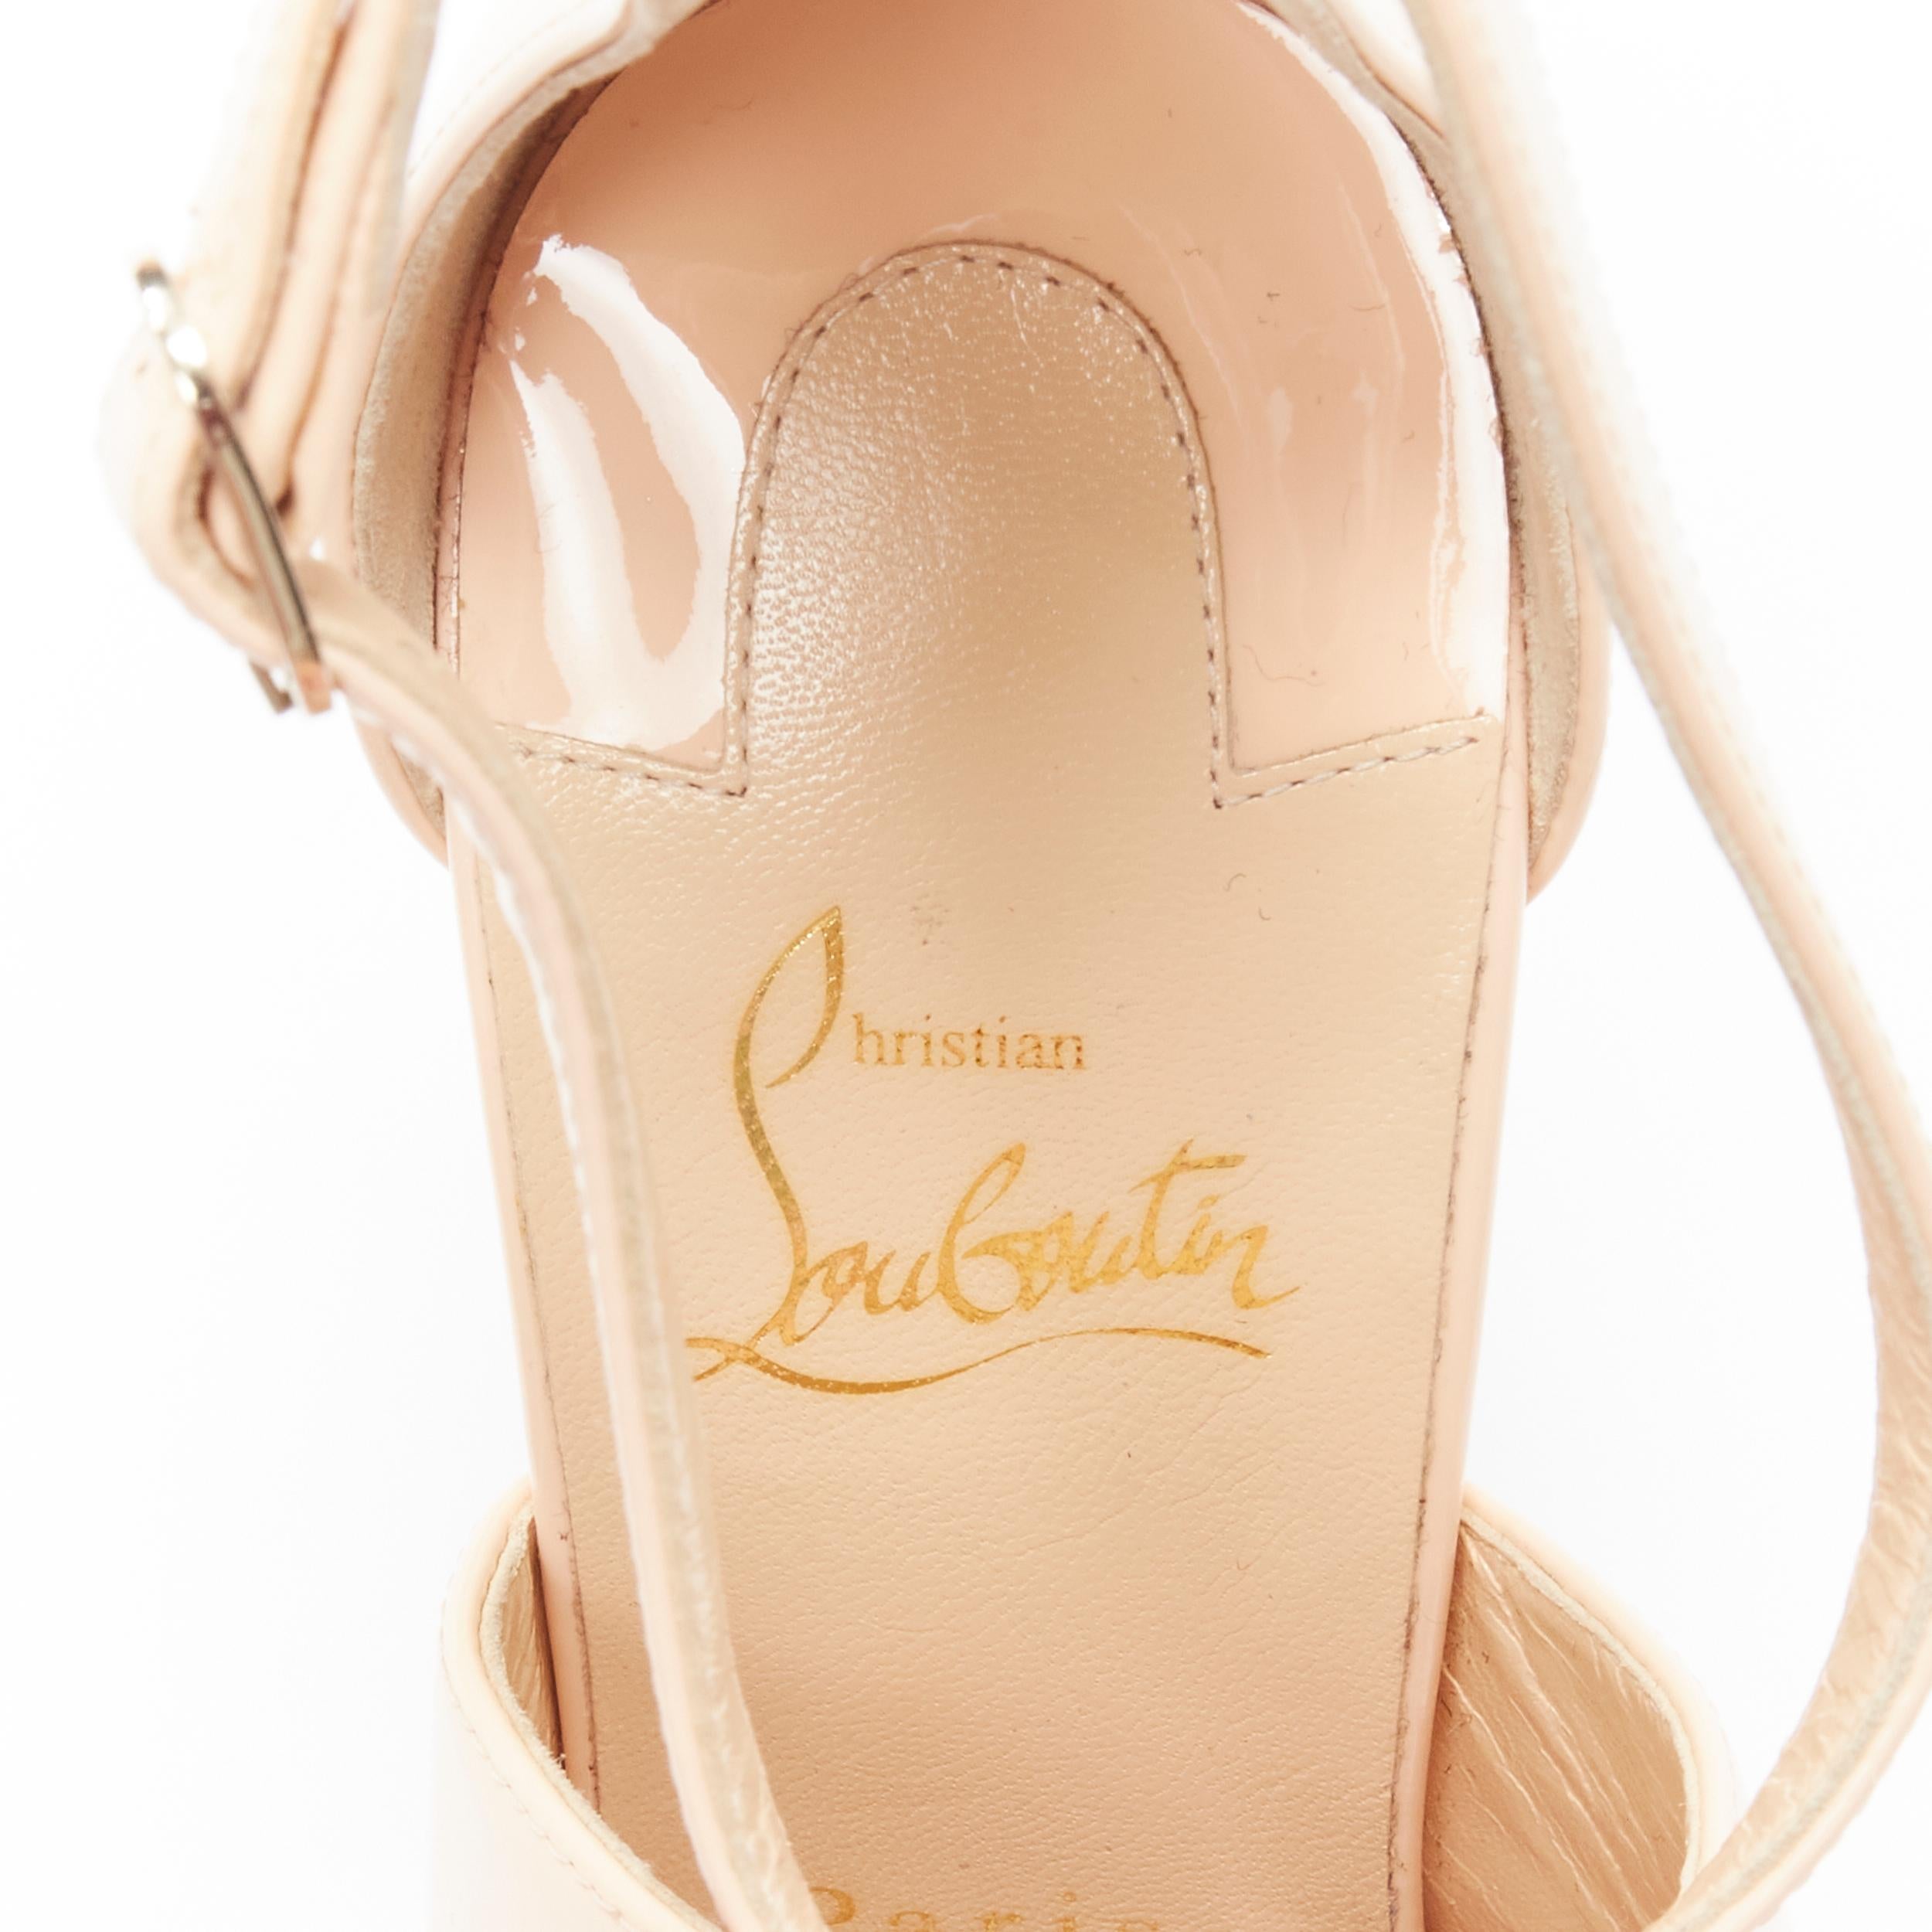 new CHRISTIAN LOUBOUTIN Malefissima 110 nude patent cross strappy sandals EU37.5 For Sale 2